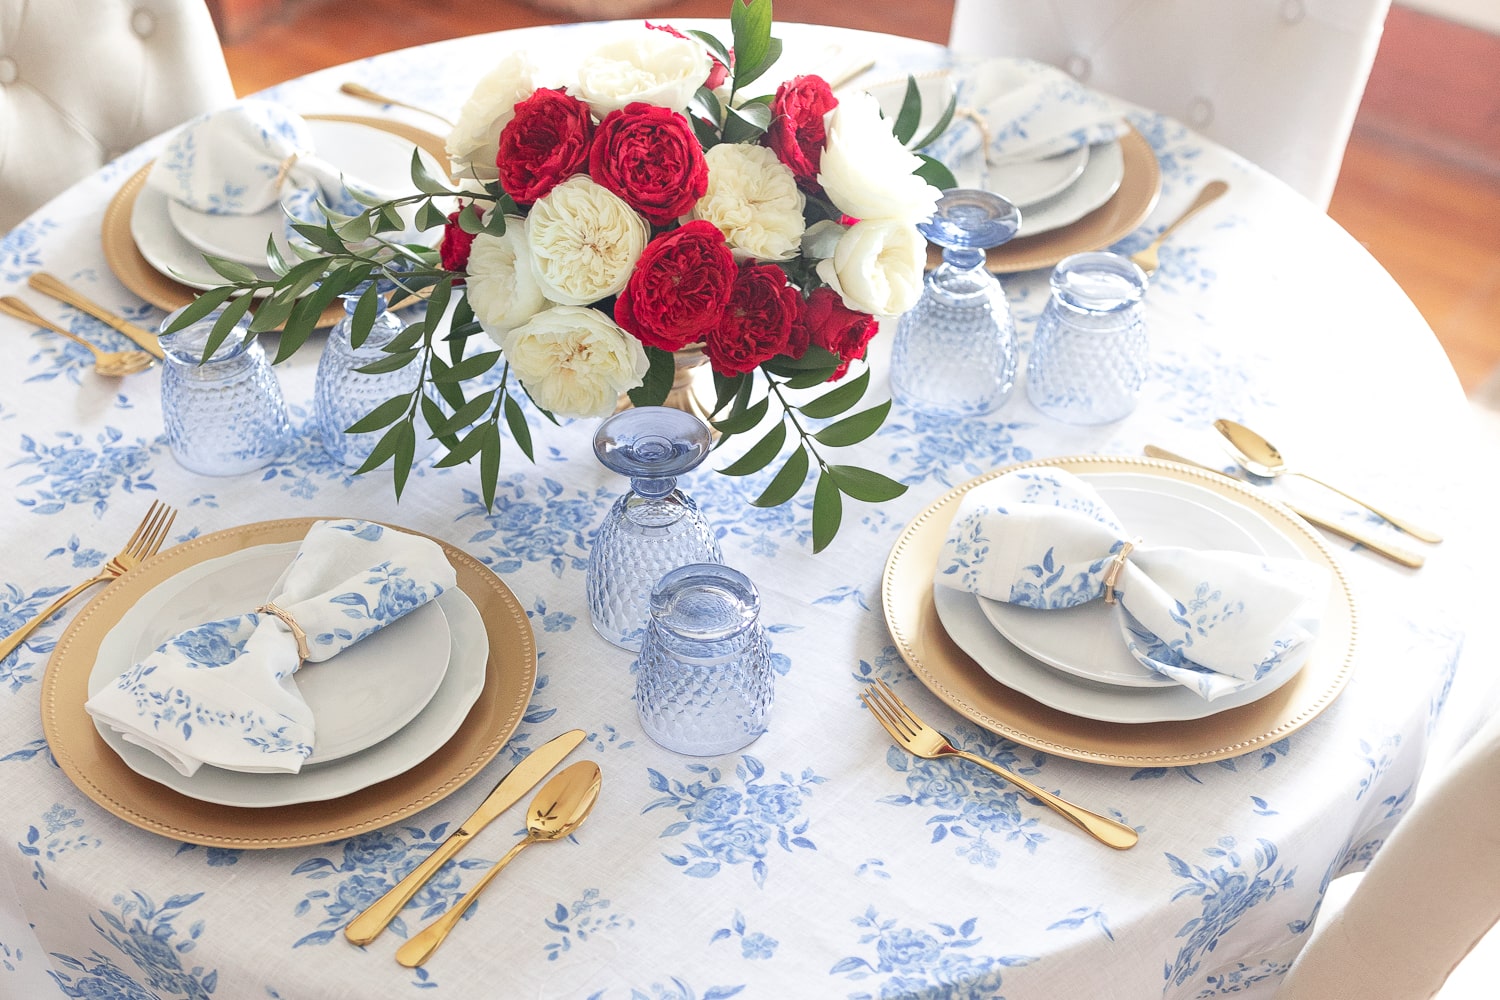 Blogger Stephanie Ziajka shares Fourth of July table decorations on Diary of a Debutante